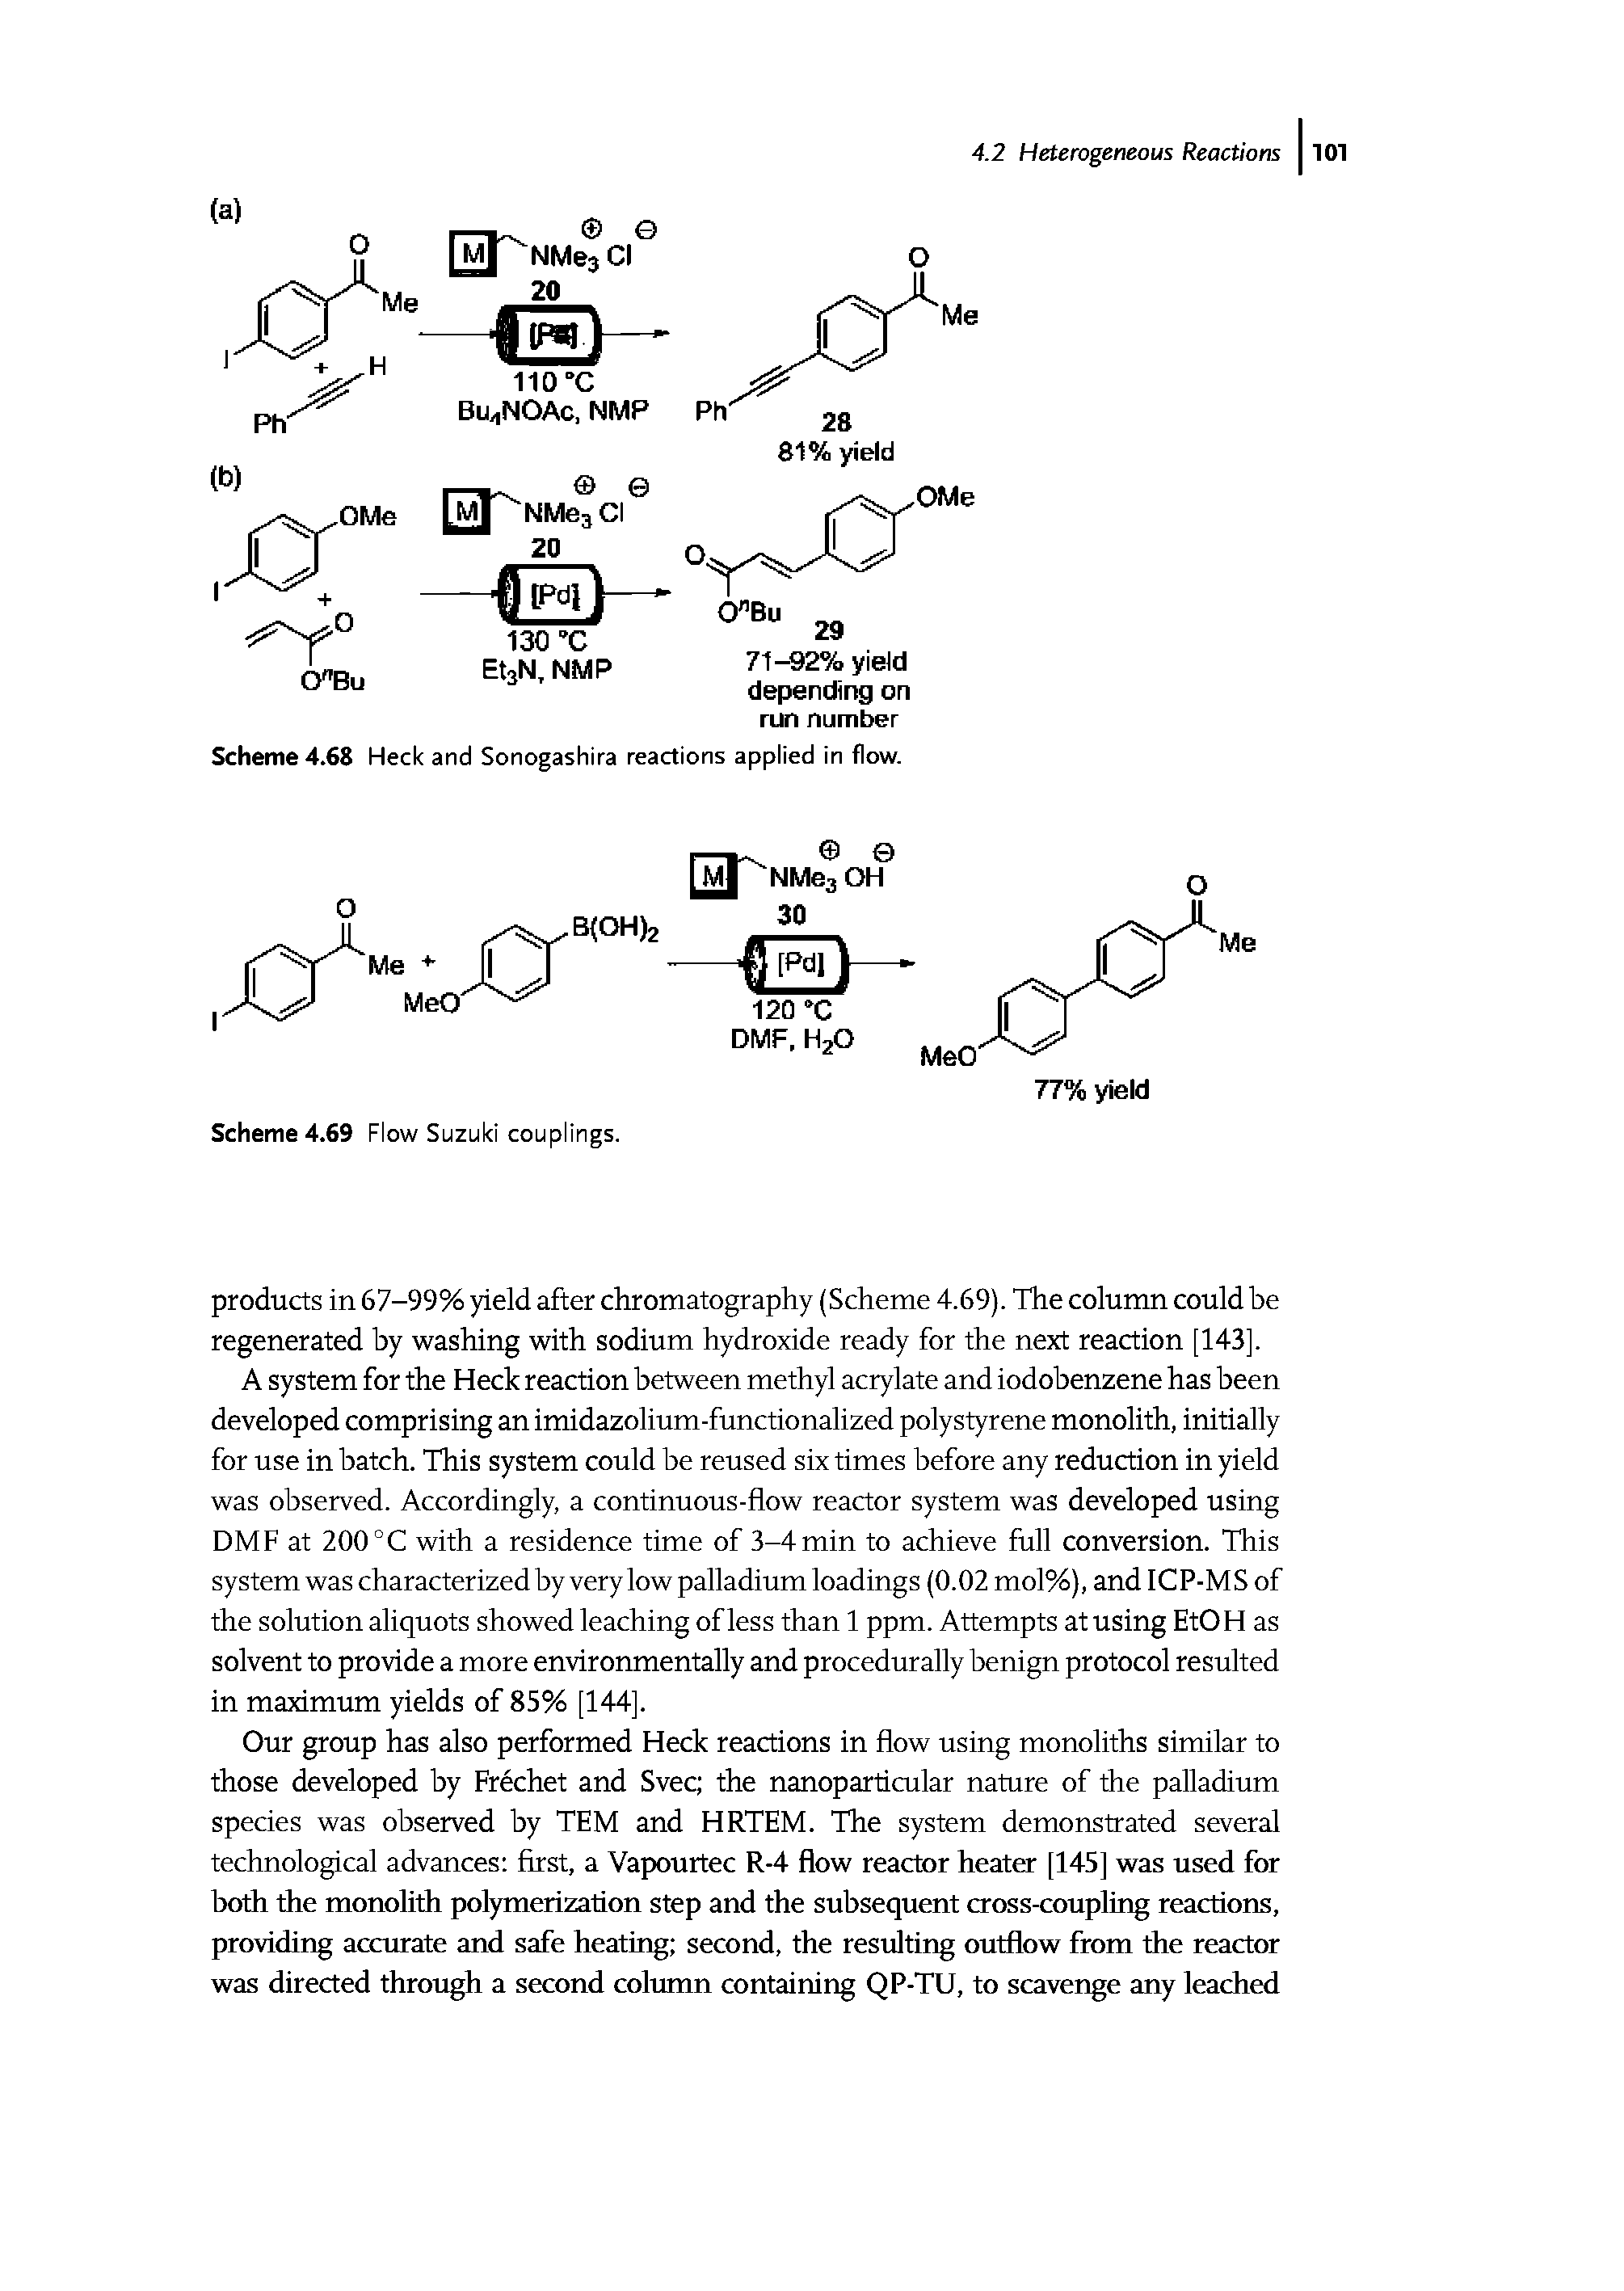 Scheme 4.68 Heck and Sonogashira reactions applied in flow.